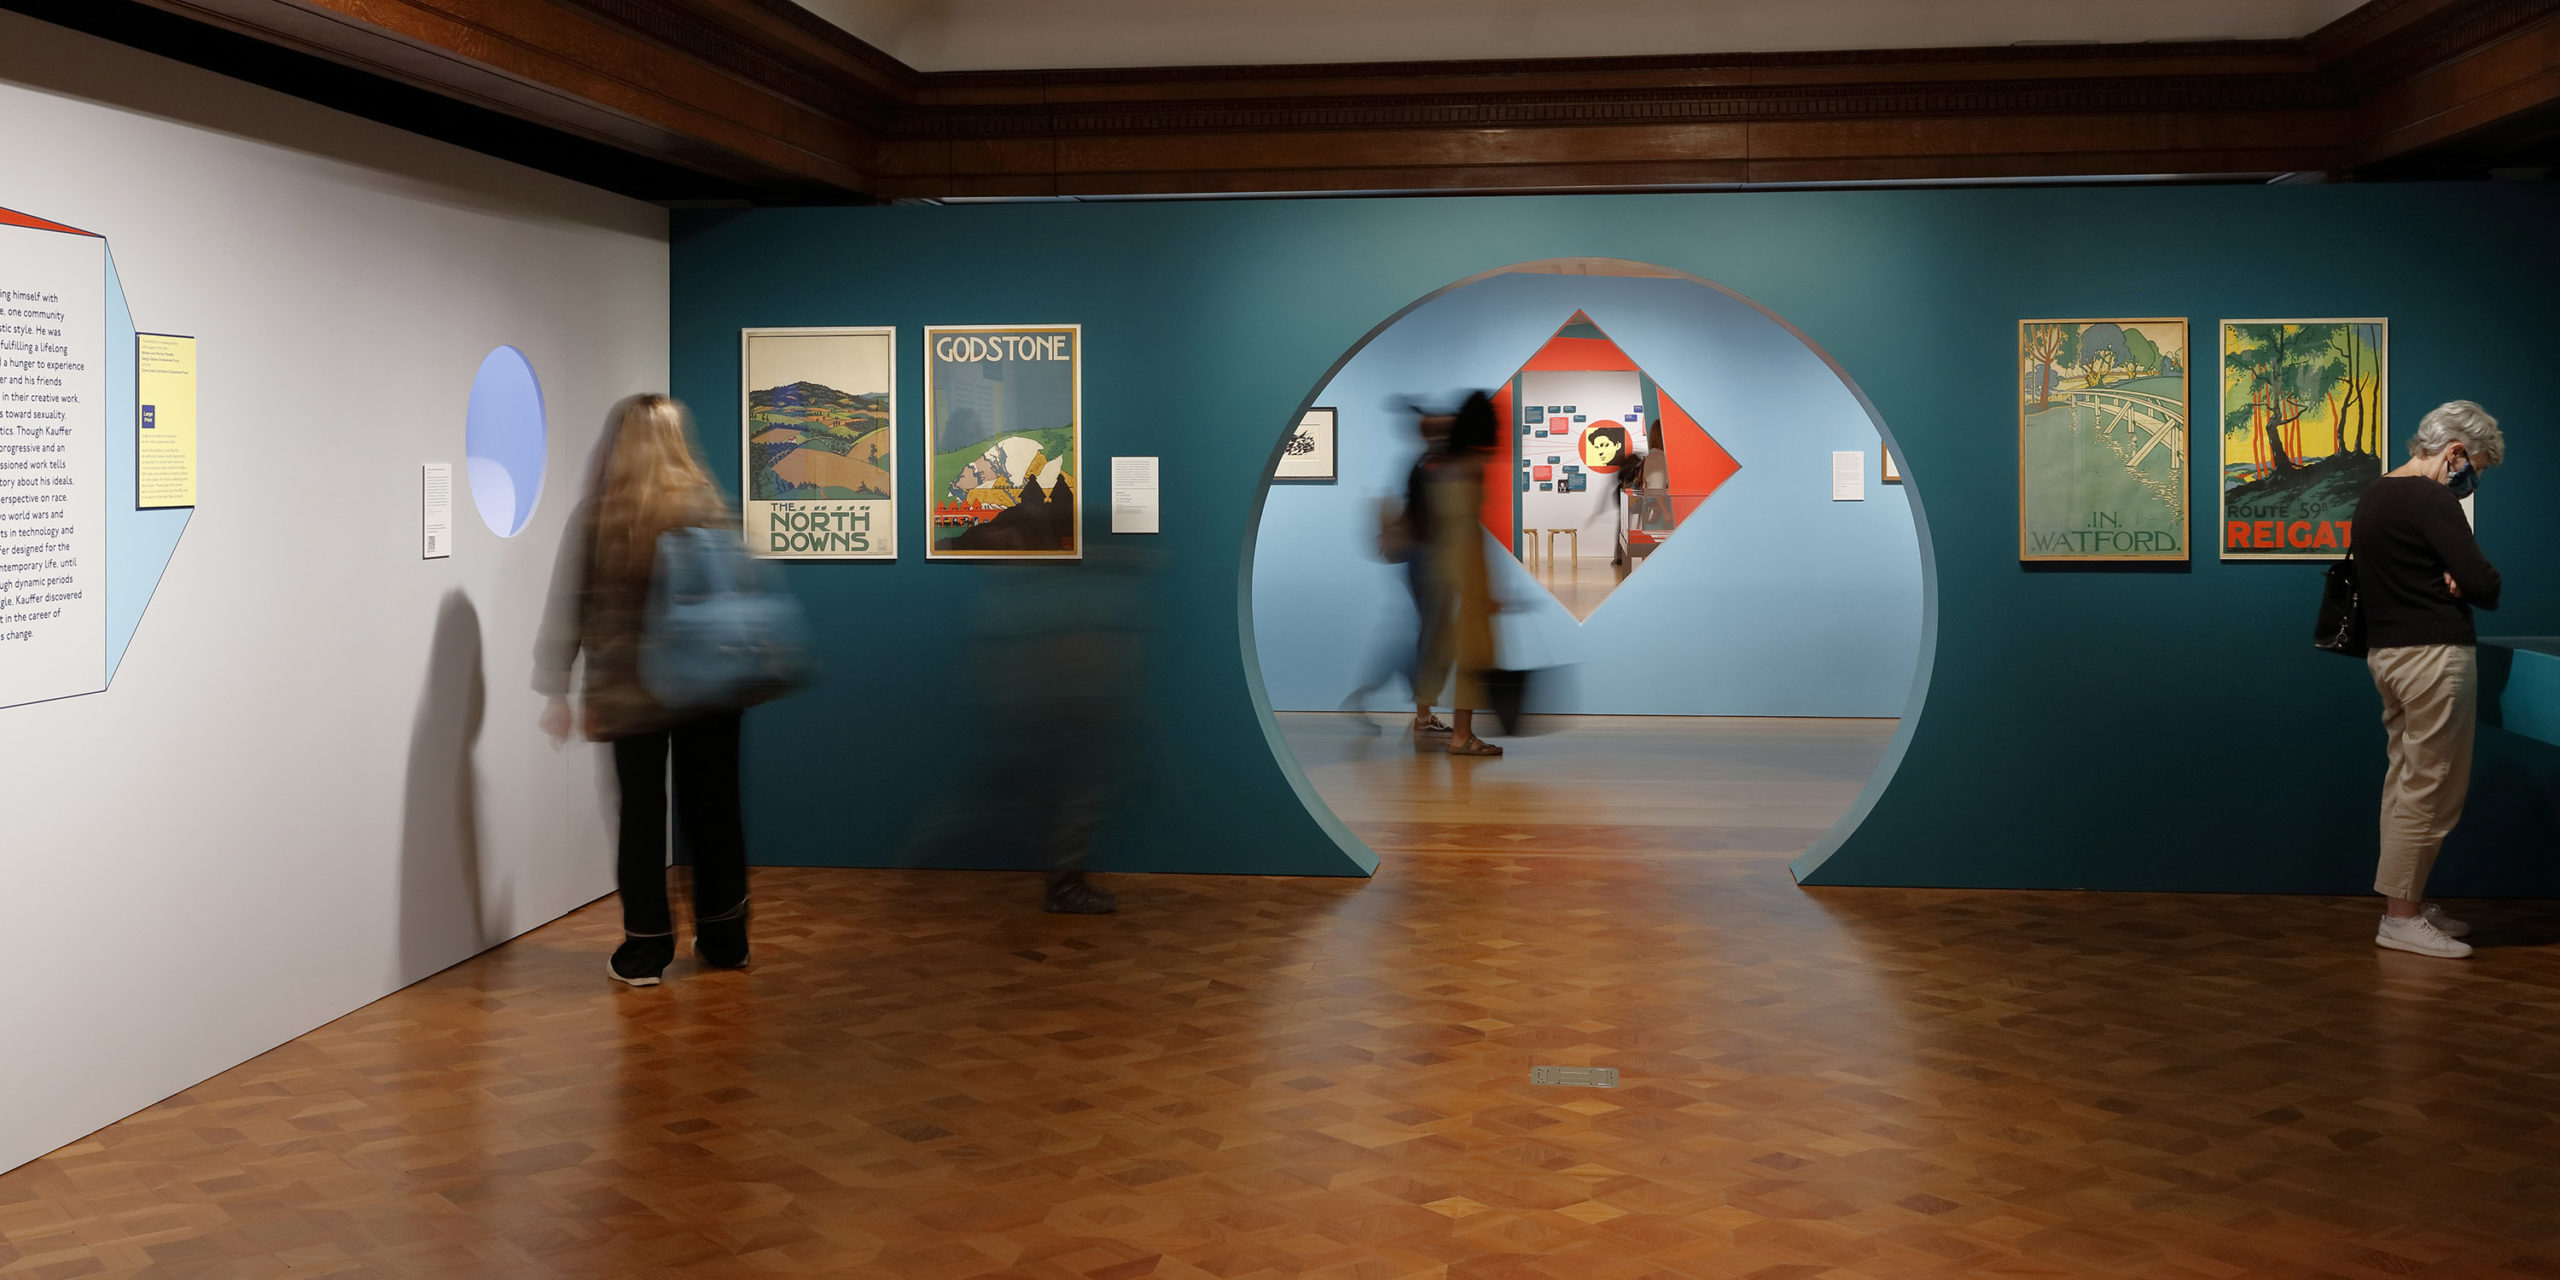 View of gallery wall painted blue with large circular opening, flanked on either side by vertical posters and visitors looking at artwork. Circular opening provides sightline to other parts of the exhibition and more visitors within the museum.